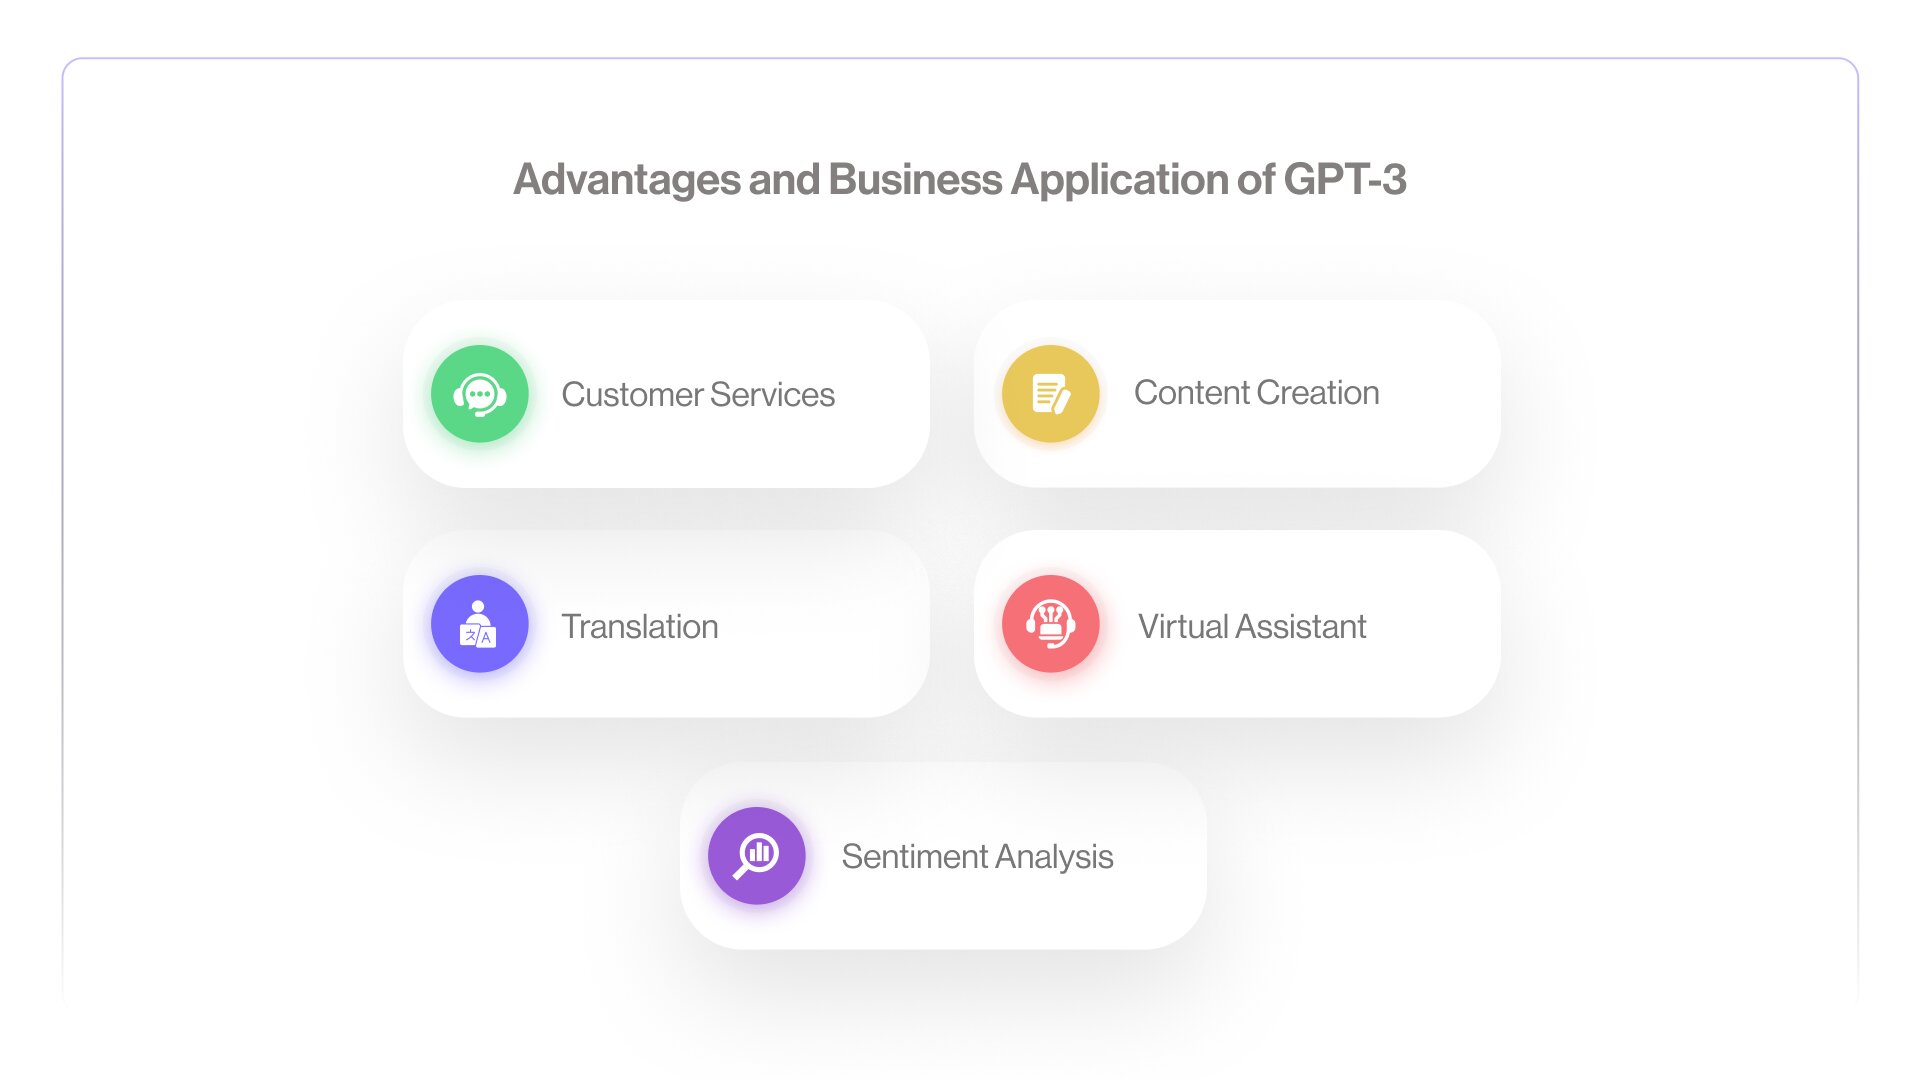 Advantages and Business Applications of GPT-3